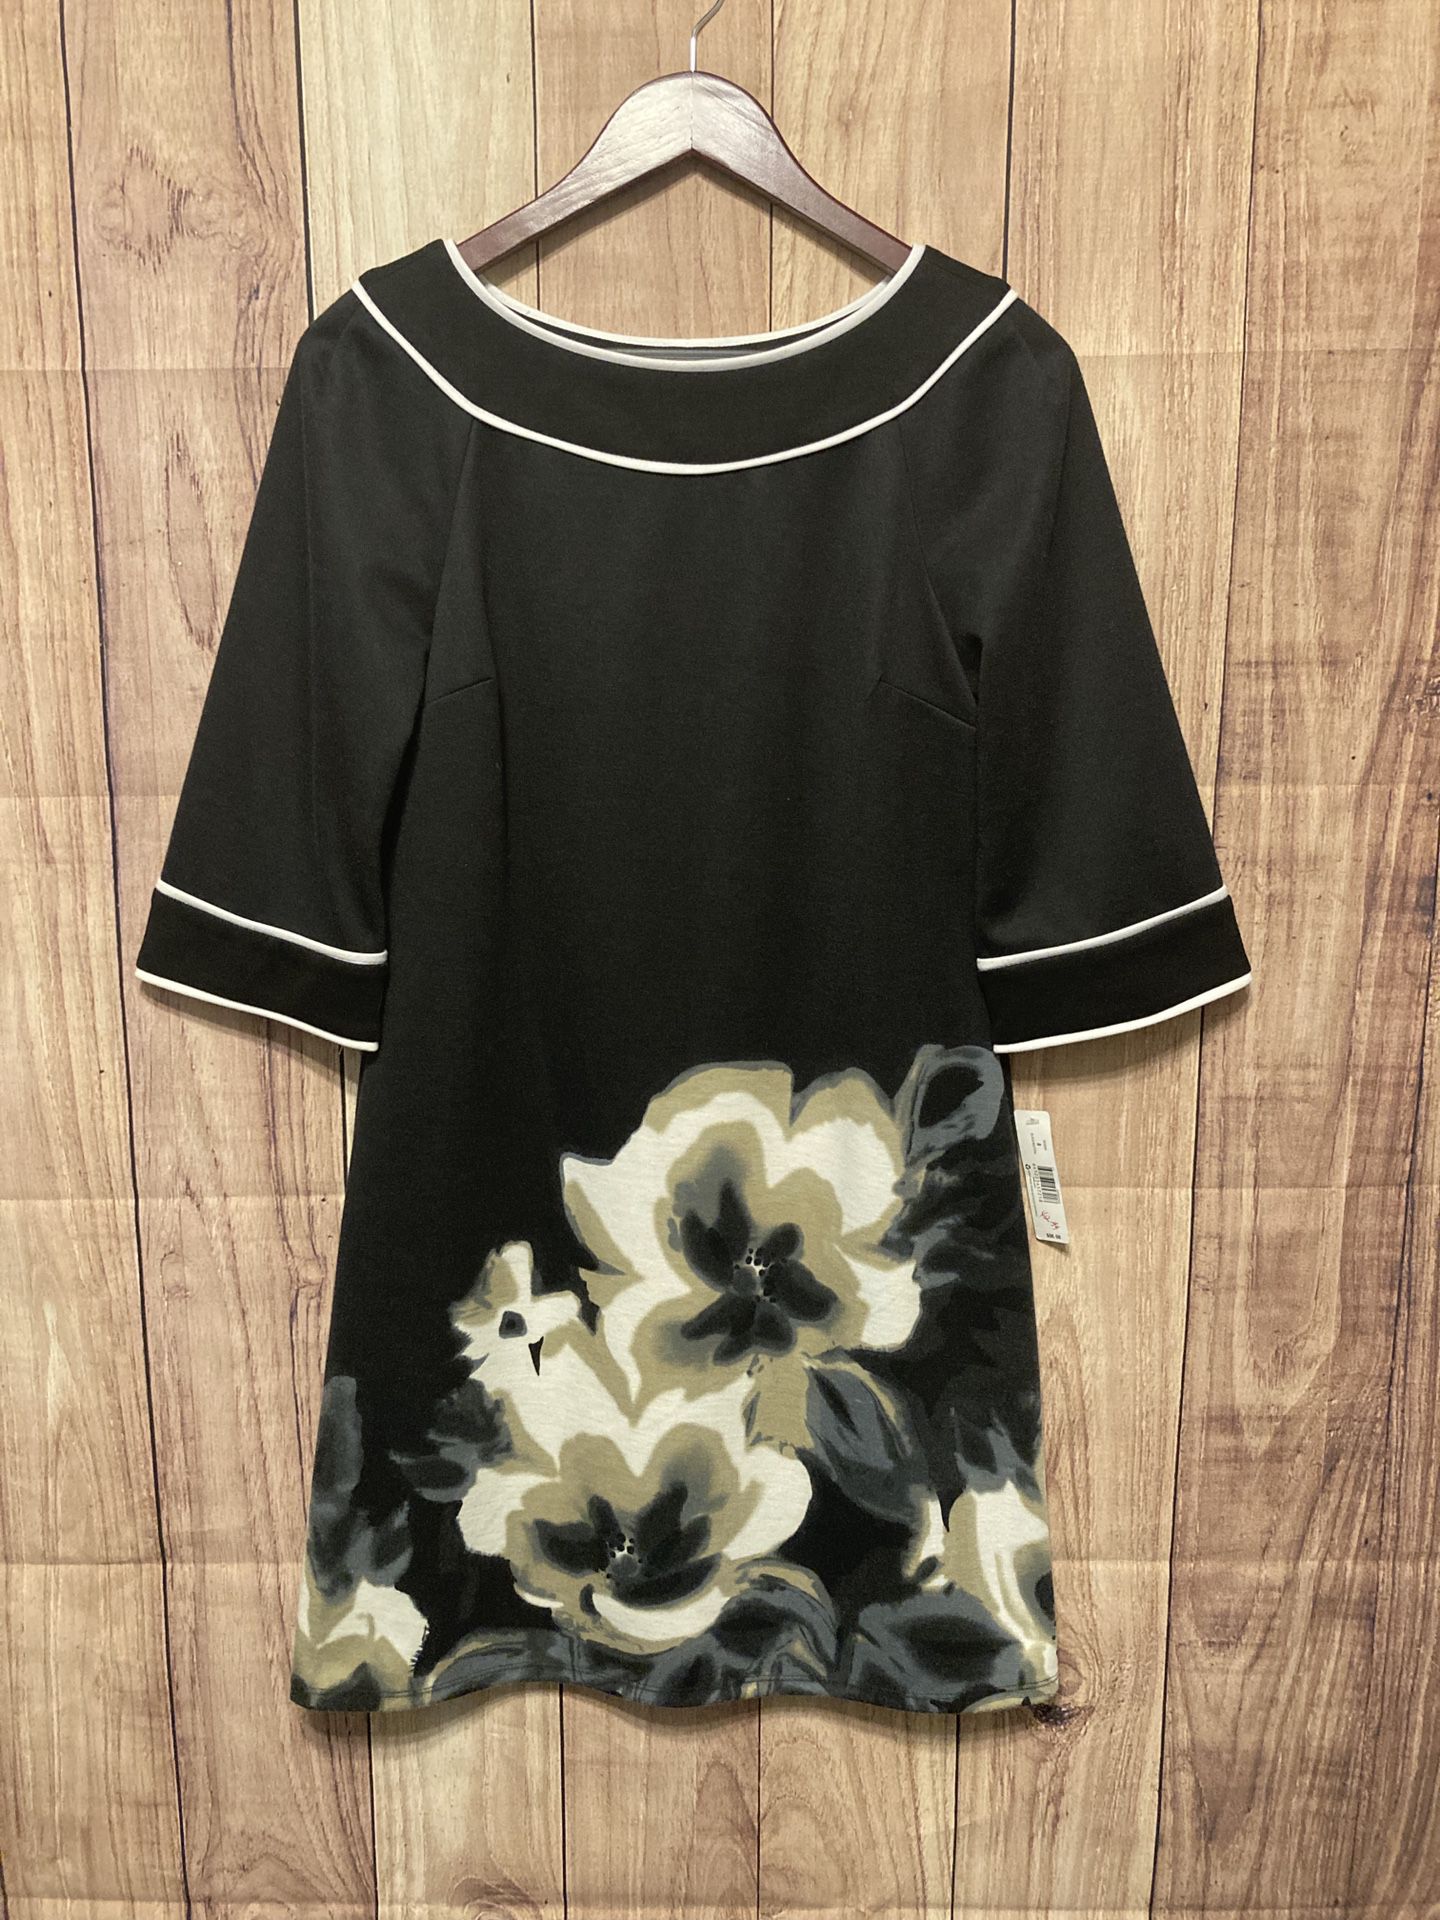 ND New Directions size 8 NWT dress black neutral floral belk